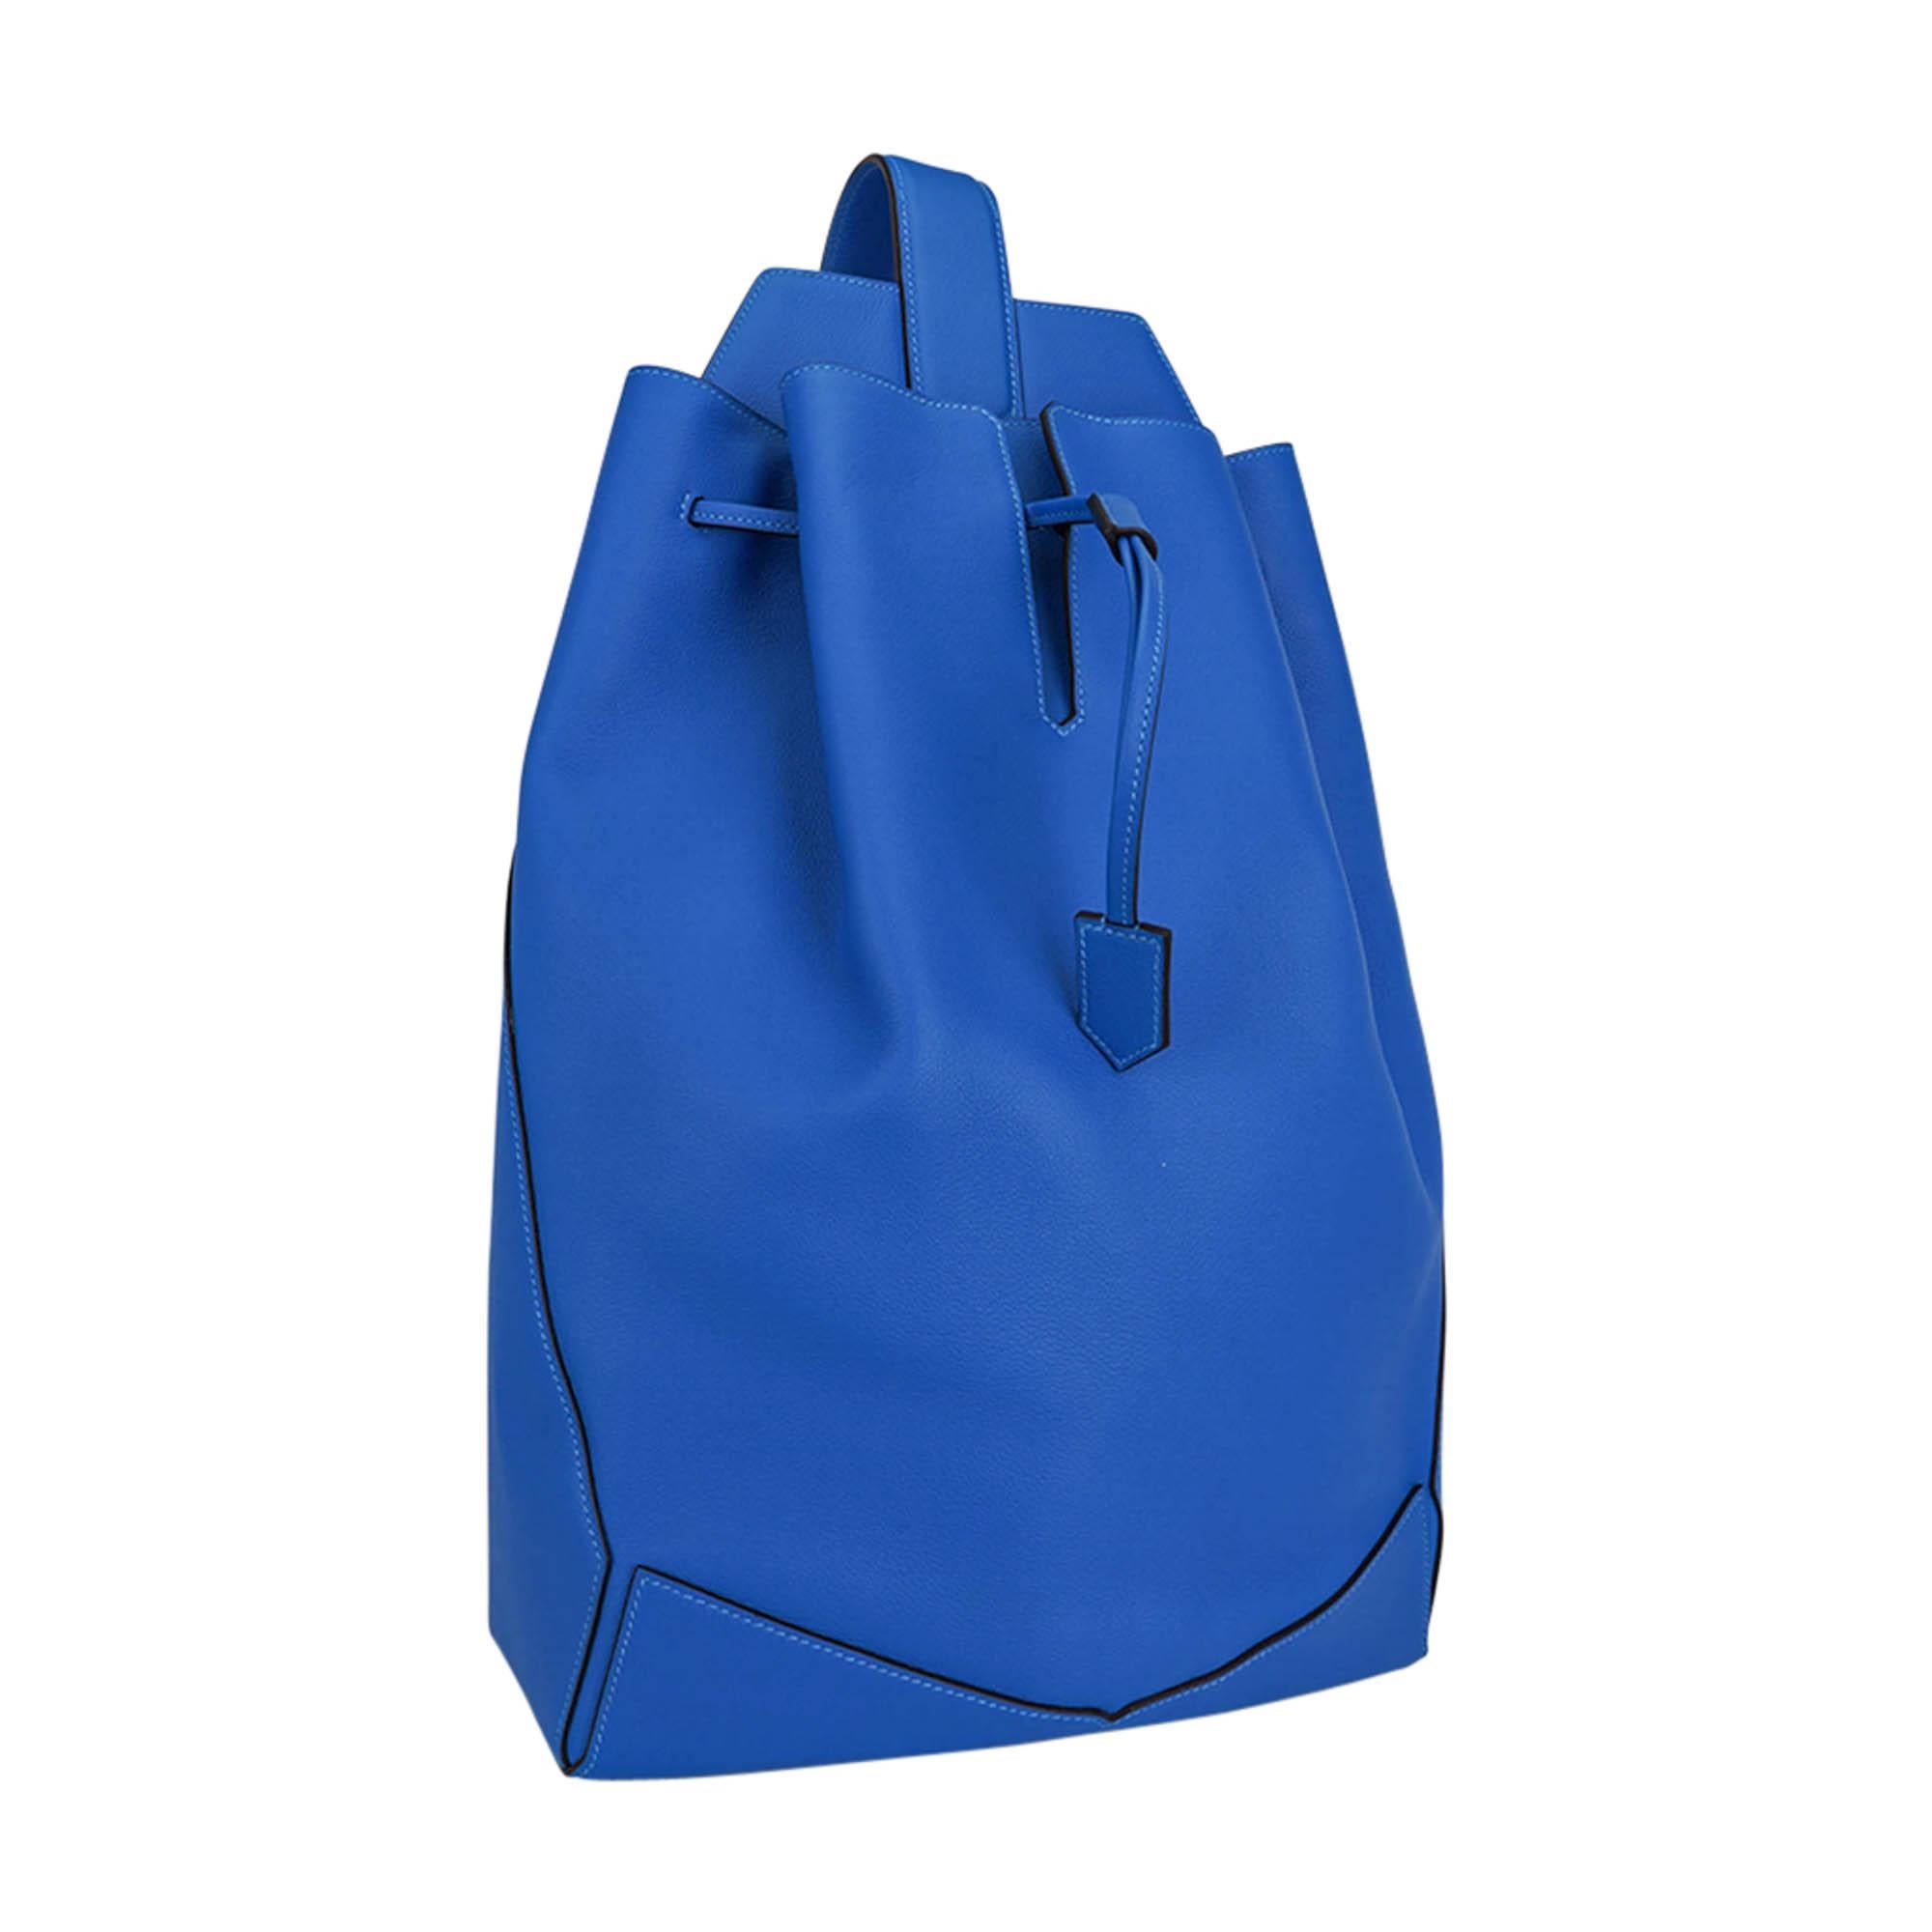 Mightychic offers an Hermes Flash Sailor sling backpack featured in Blue and Evercolor leather.
Bag has a leather drawstring closure one adjustable shoulder strap.
Sliding closure system.
Interior has a slot pocket and rear side zip